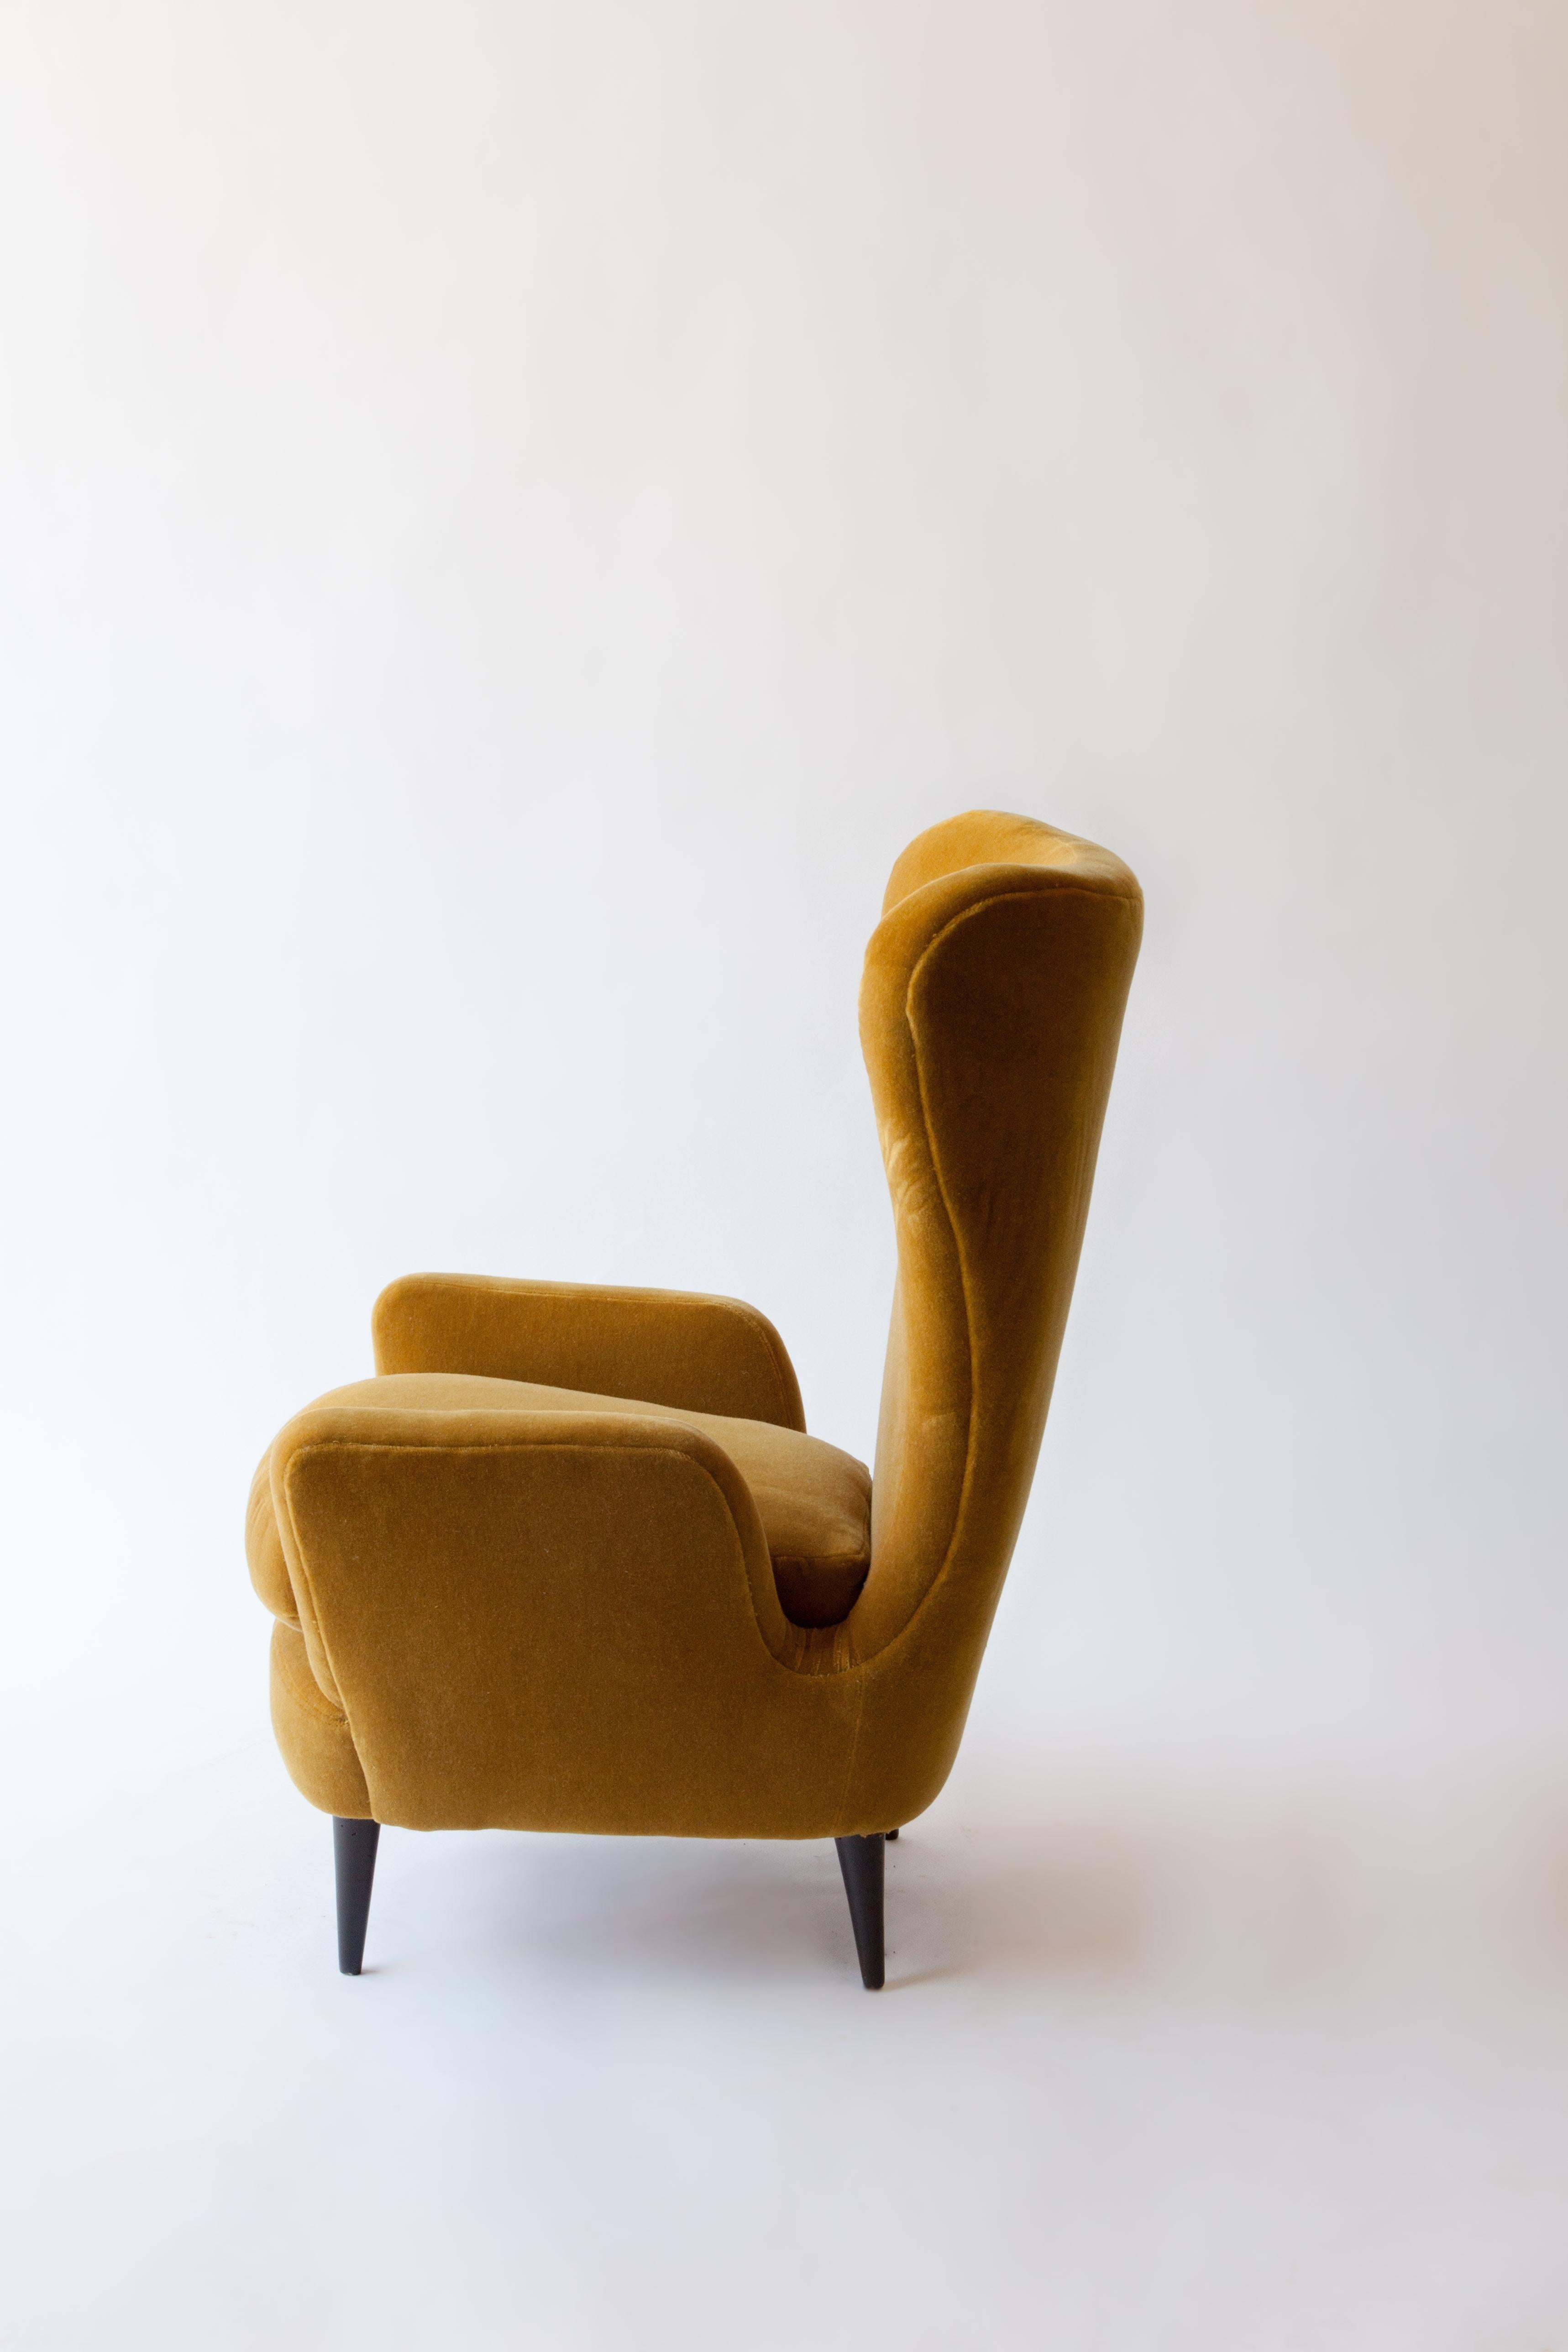 A 1950s Italian armchair attributed to Paolo Buffa newly reupholstered in an ocre wool mohair.